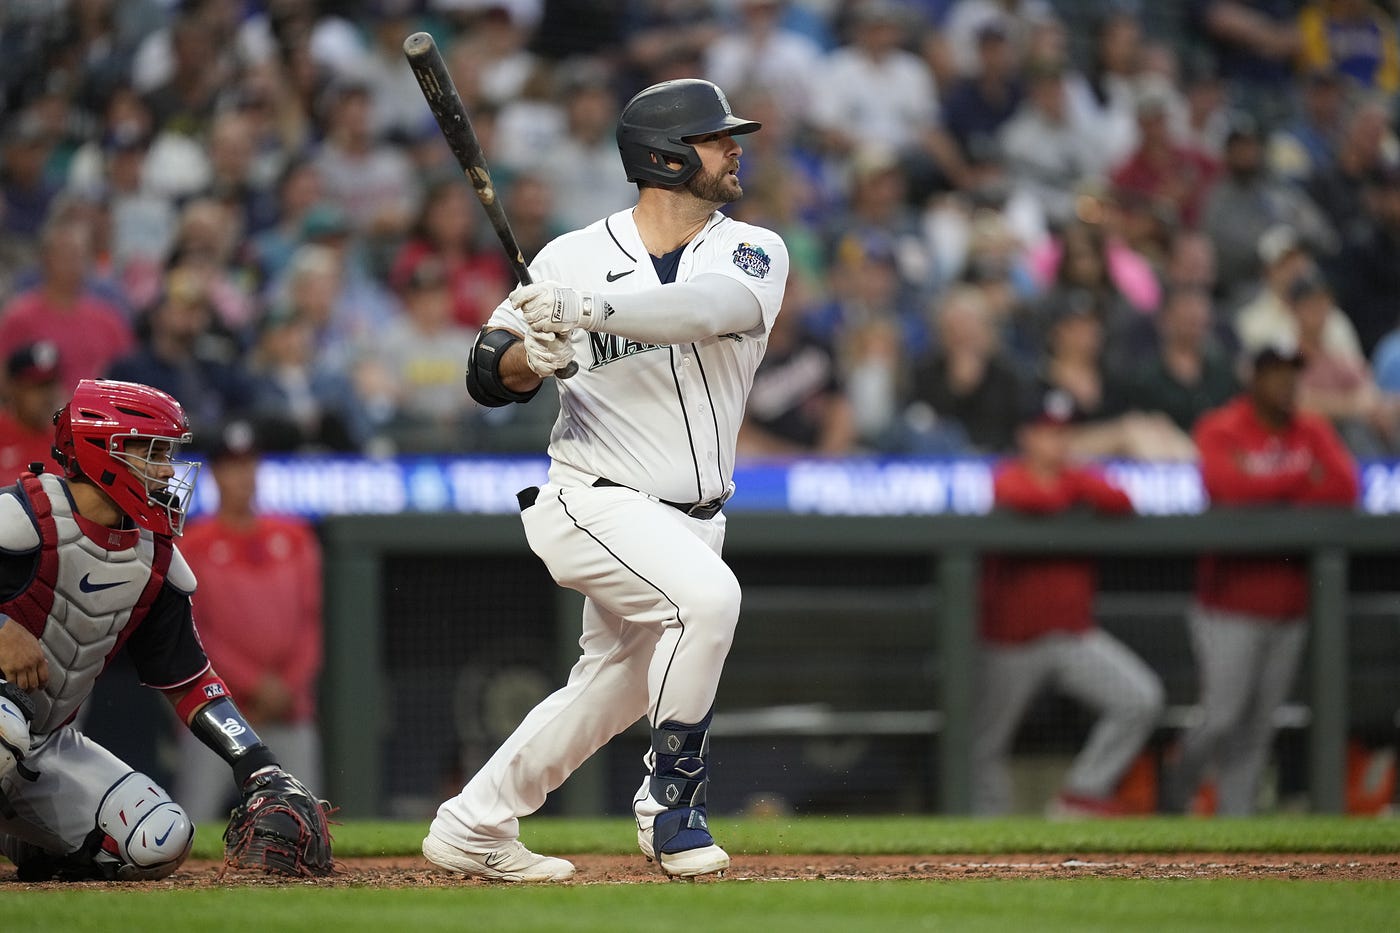 France hits 2 homers, Gilbert goes 8 innings as Mariners edge reeling A's  3-2 - The San Diego Union-Tribune